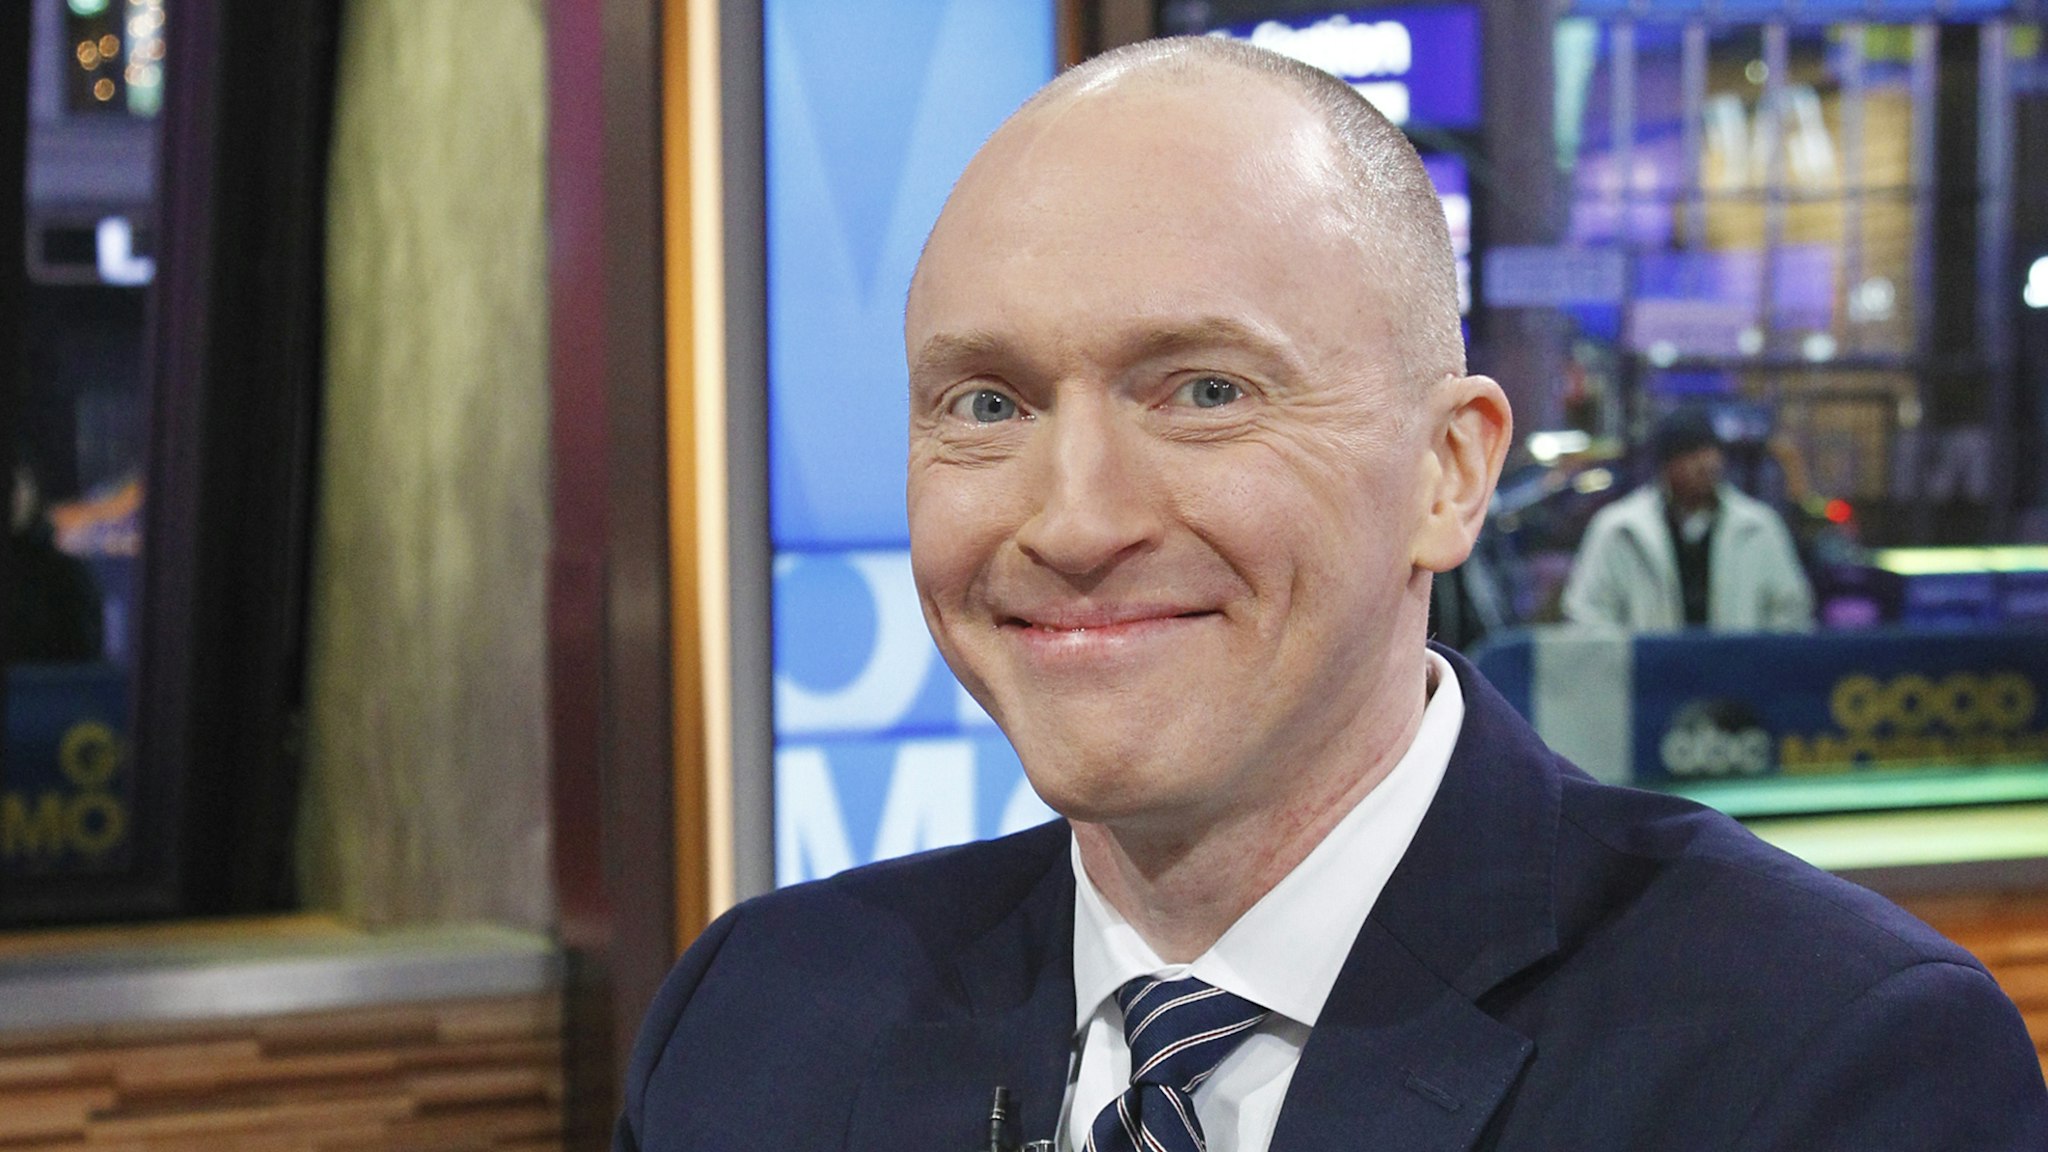 GOOD MORNING AMERICA - George Stephanopoulos interviews Carter Page, former foreign-policy adviser to Donald Trump's 2016 Presidential campaign, on "Good Morning America," Tuesday, February 6, 2018, airing on the Walt Disney Television via Getty Images Television Network.